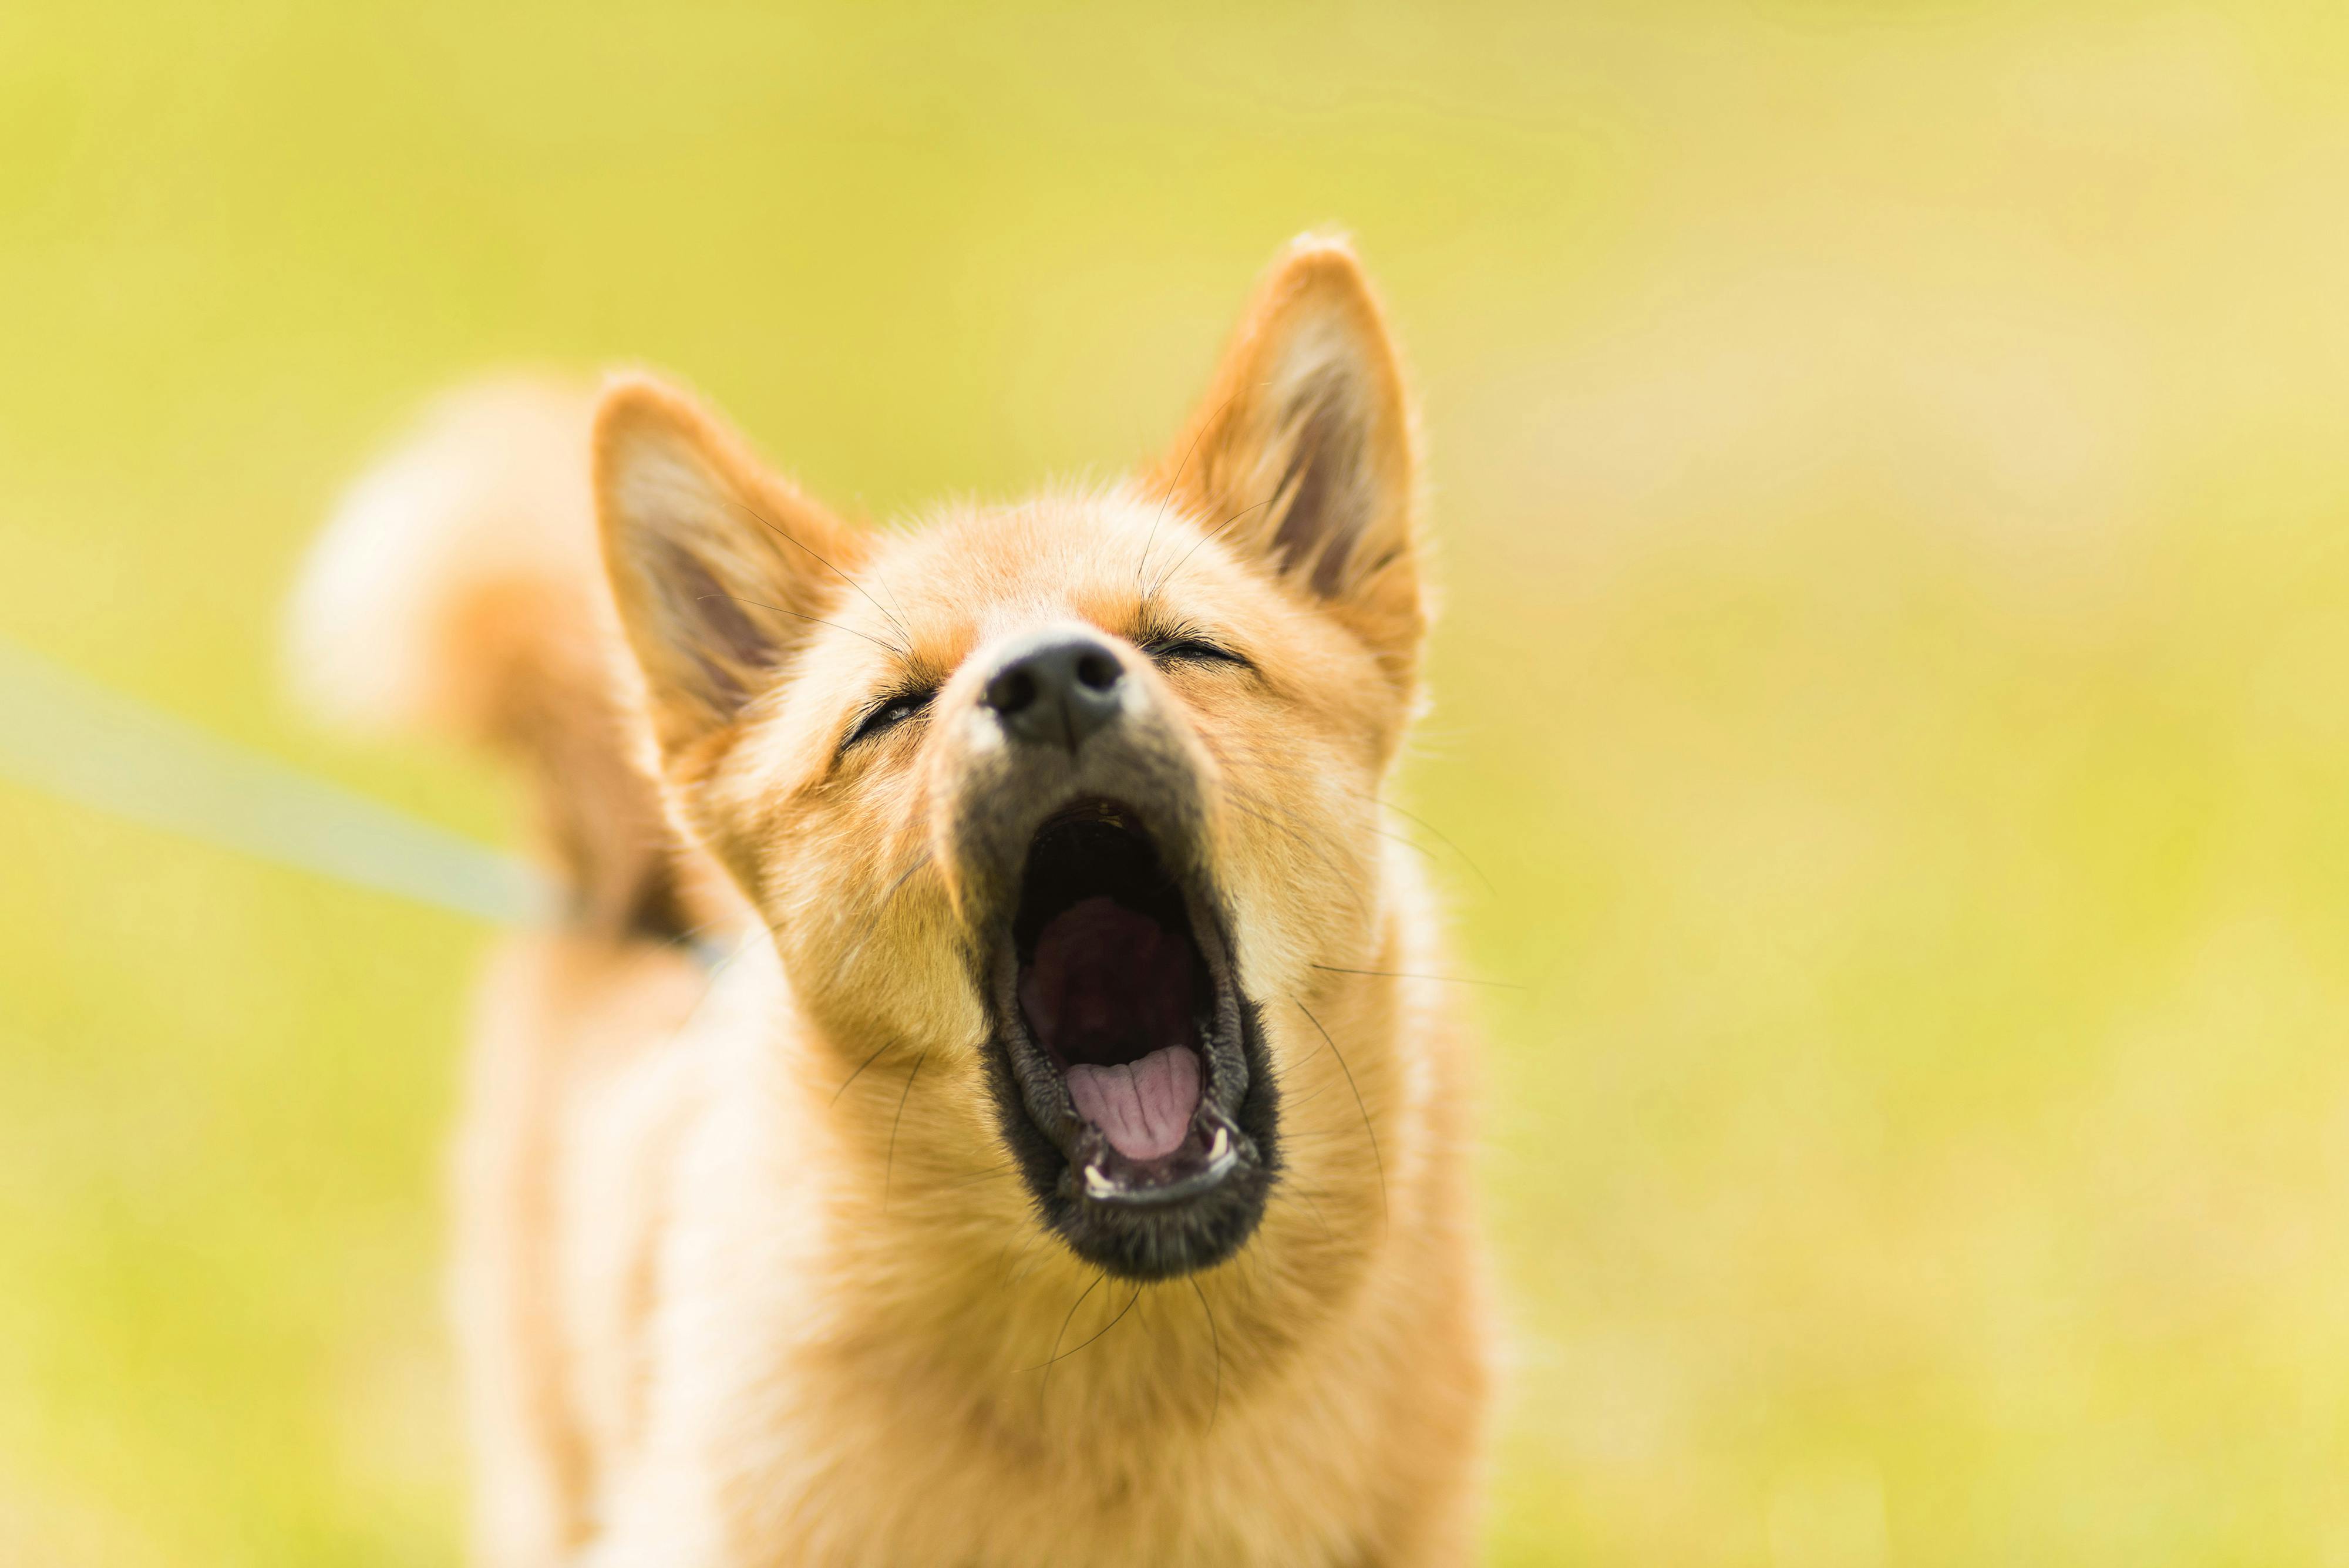 Dog with mouth open